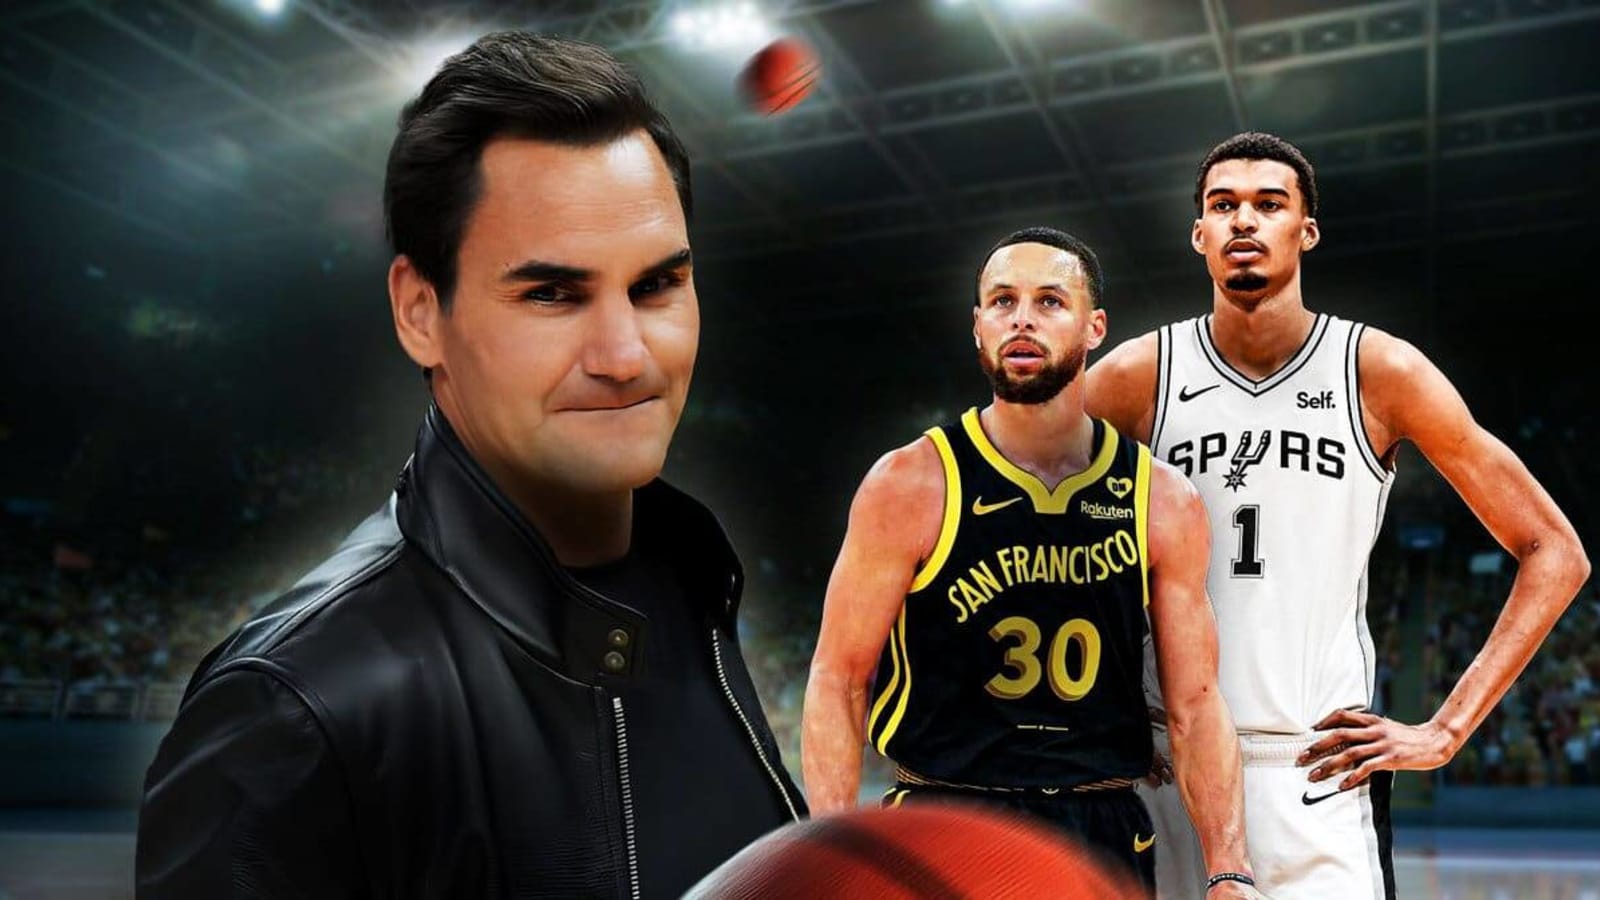 Warriors: 20x Grand Slam champ Roger Federer steals the show during Spurs game